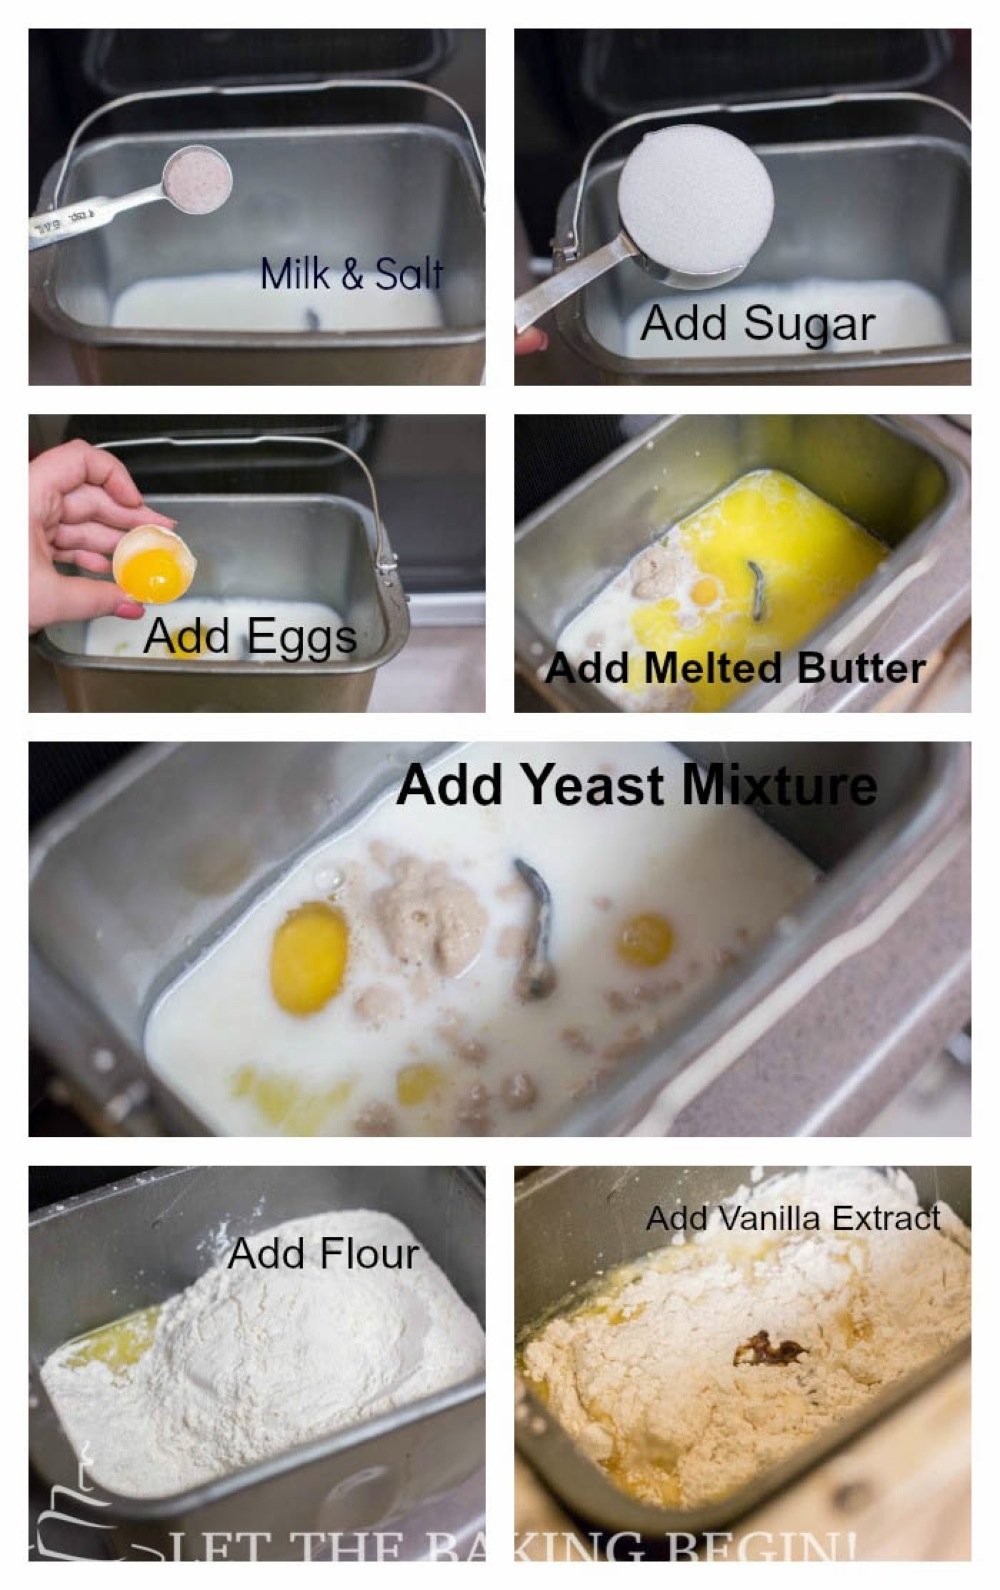 How to add milk, salt, sugar, eggs, melted butter, yeast mixture, flour and vanilla extract.